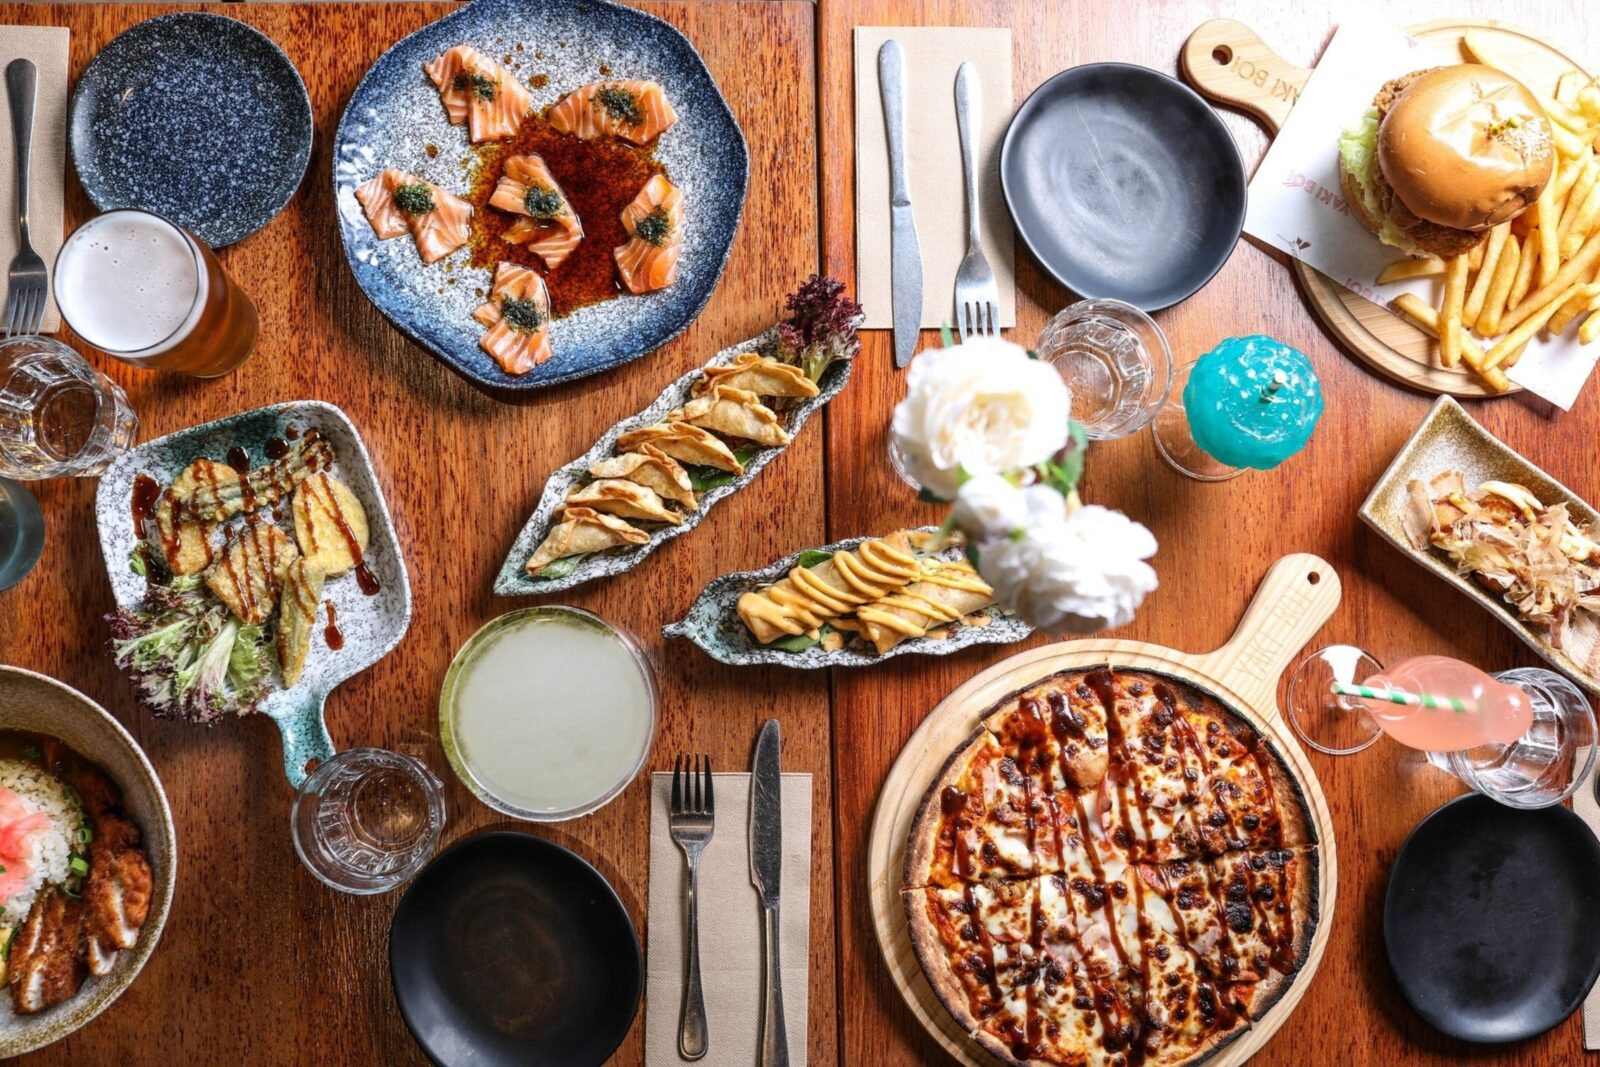 A spread of Asian-style food on a table.